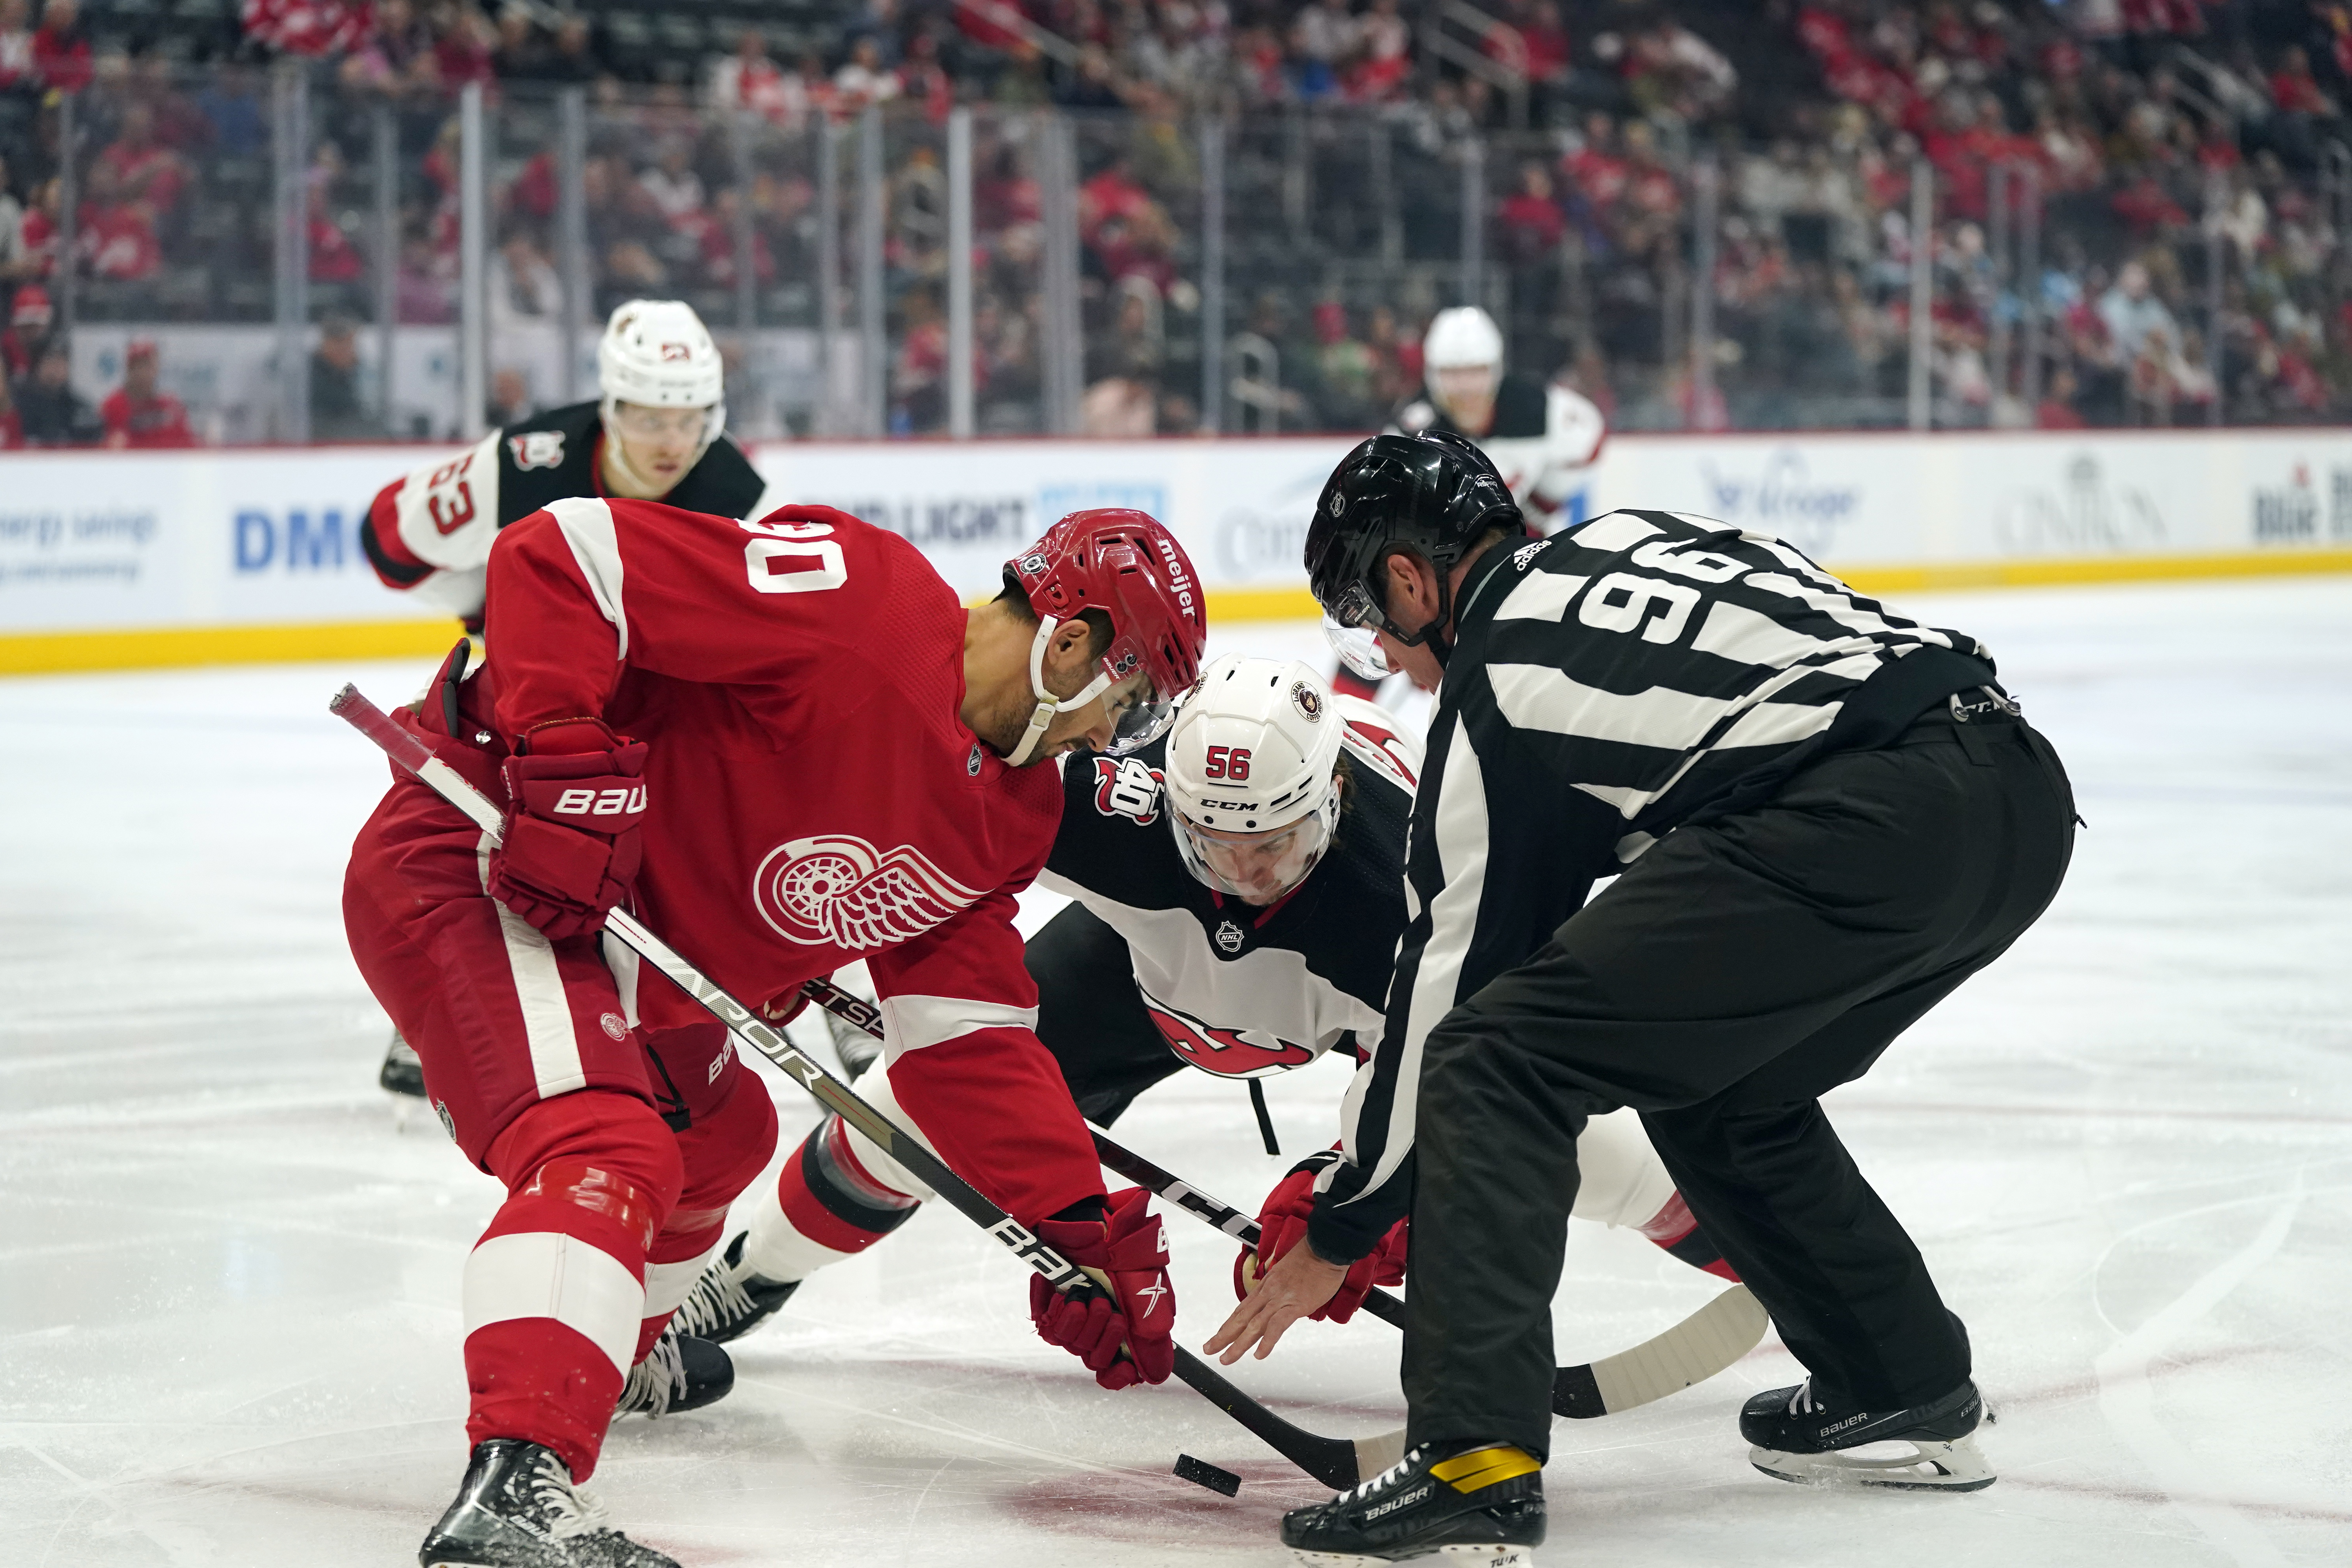 How to Watch the Red Wings vs. Devils Game: Streaming & TV Info